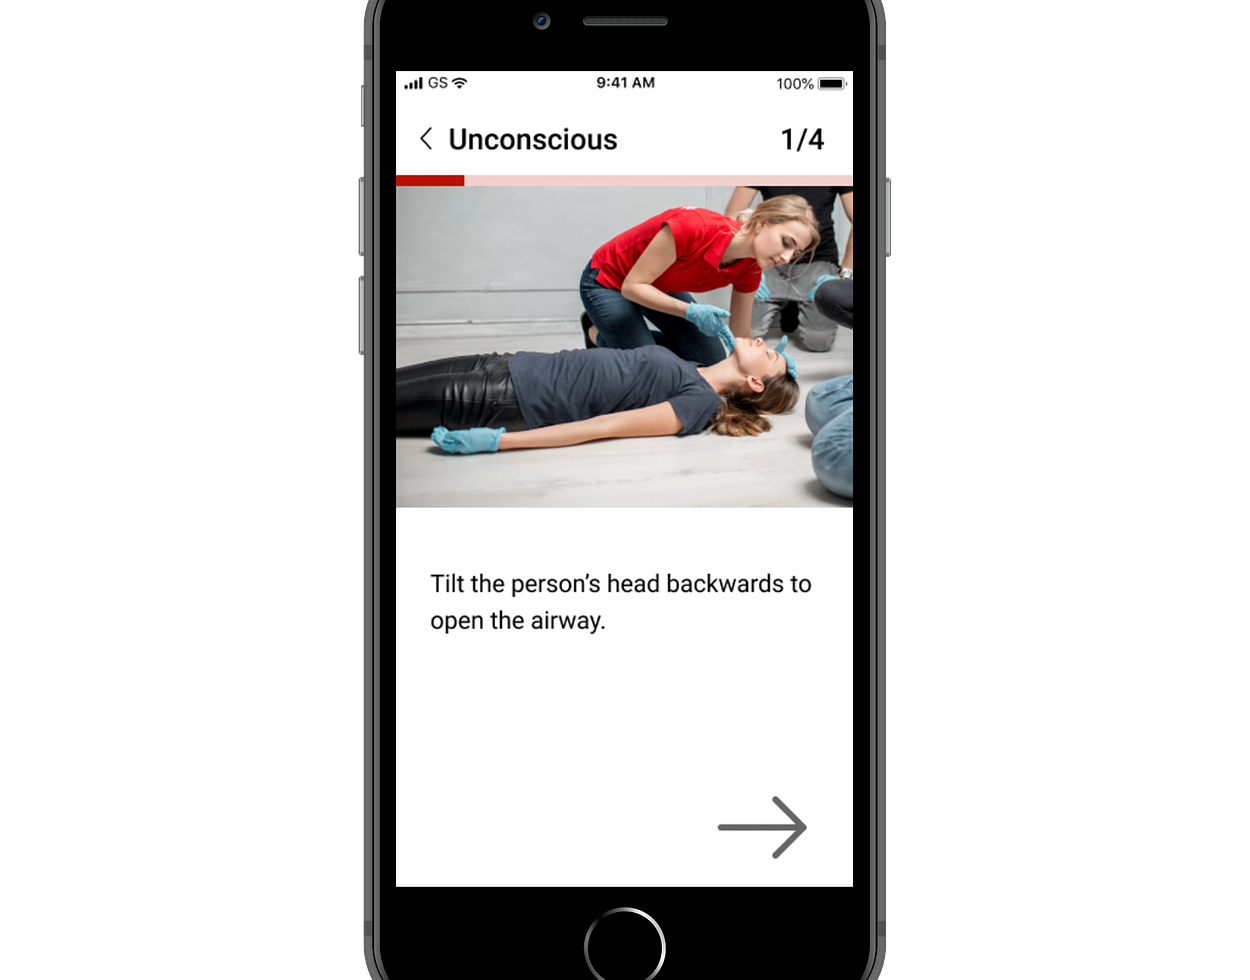 The app provides a step by step audio, visual and textual guide for providing first aid.